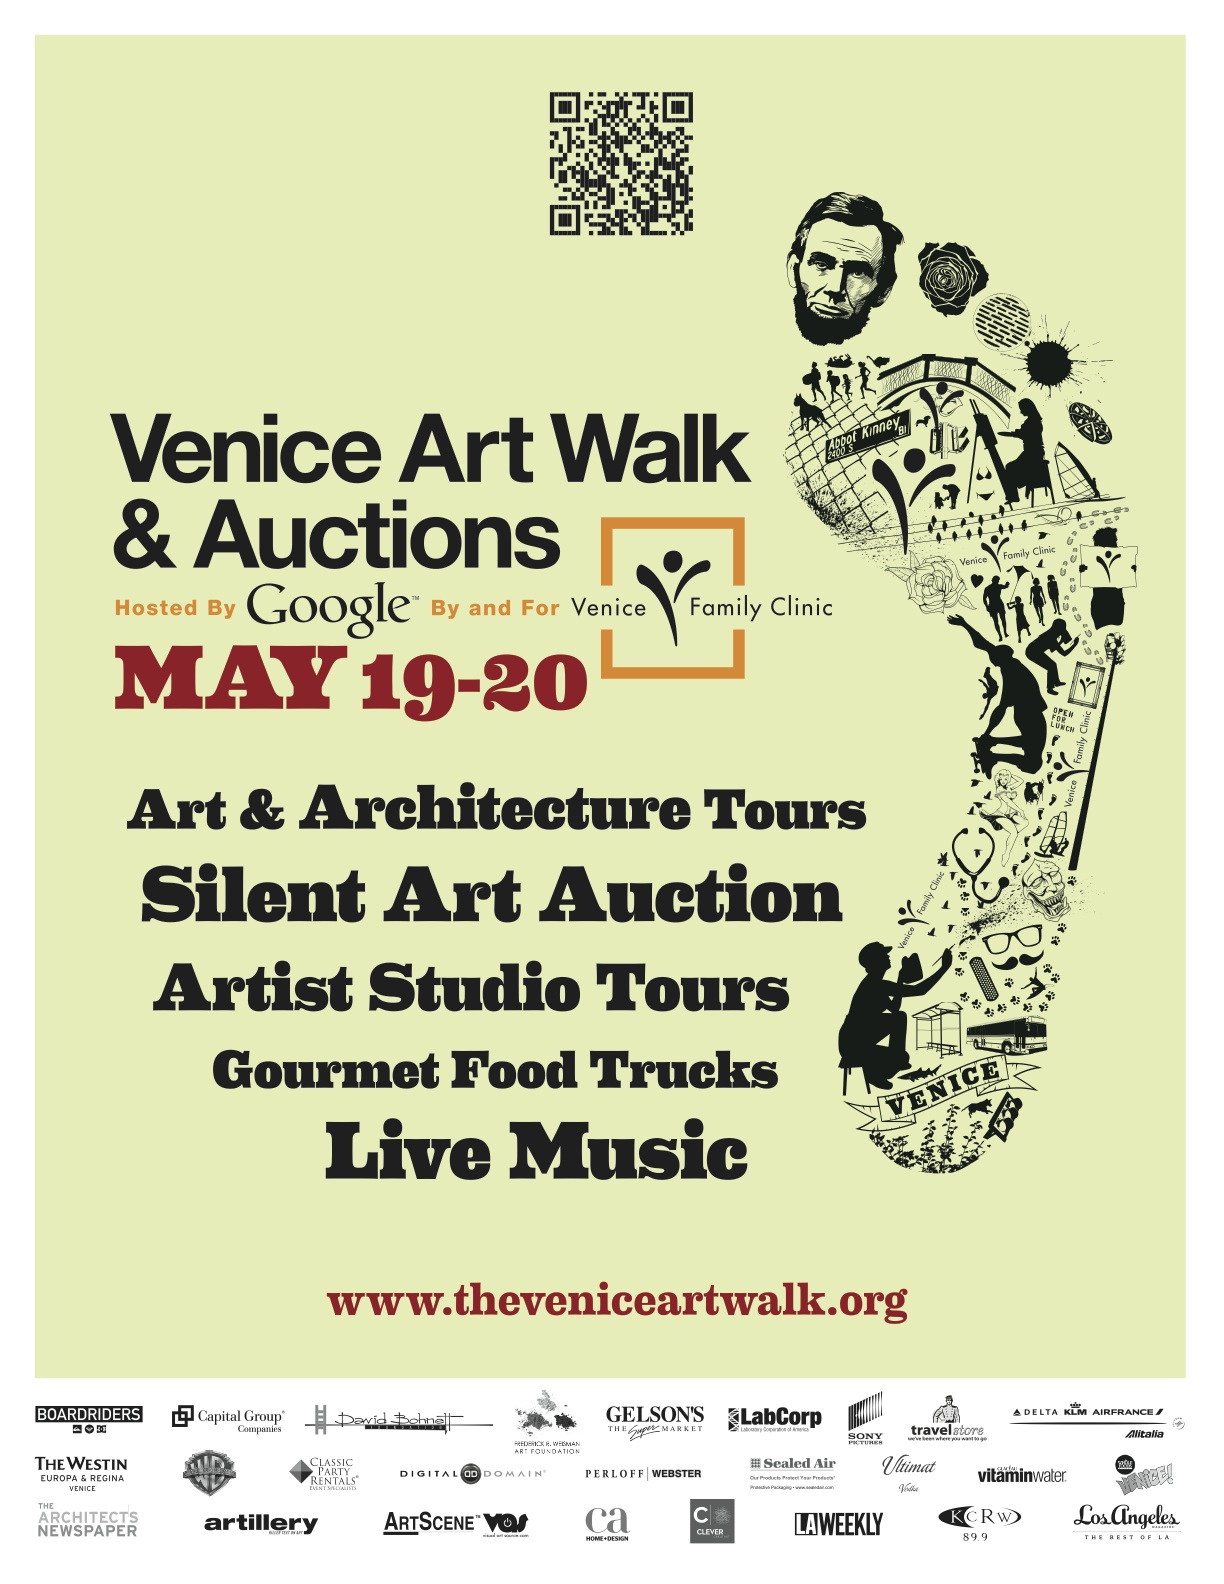 Venice Art Walk this Weekend, May 19 & 20 Silent Auction at Google’s